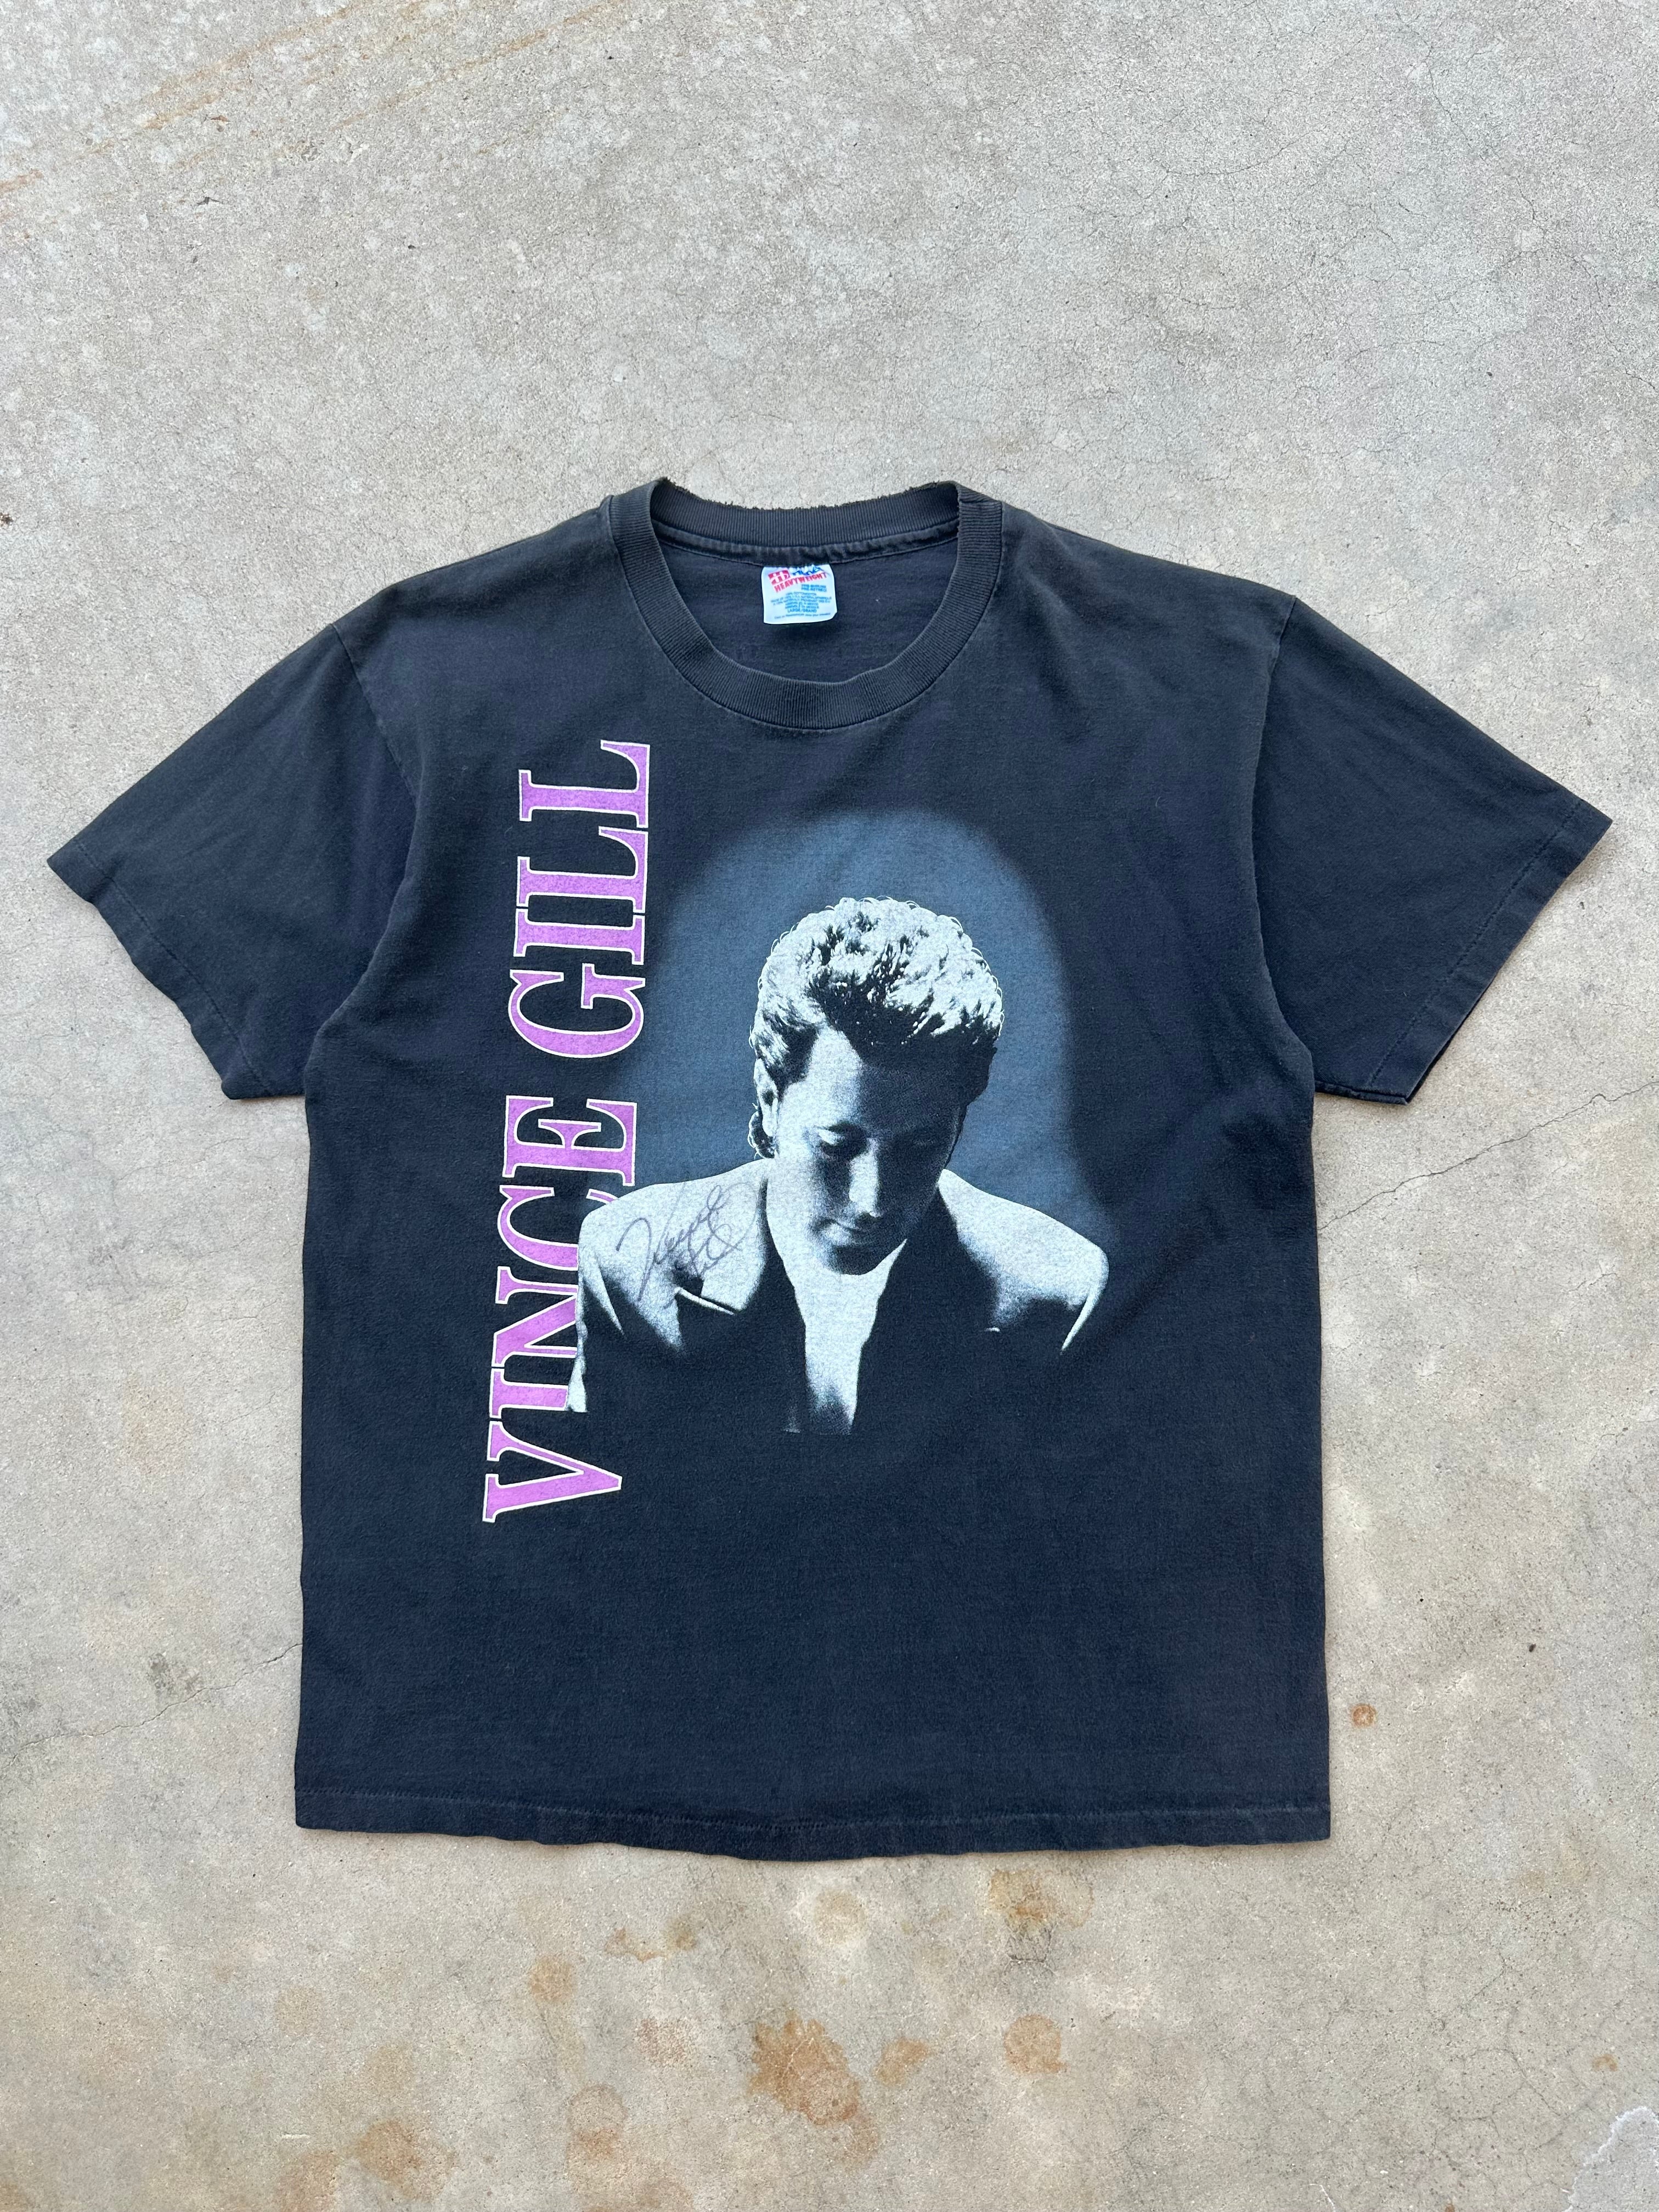 1993 Vince Gill Still Believing You T-Shirt (L)